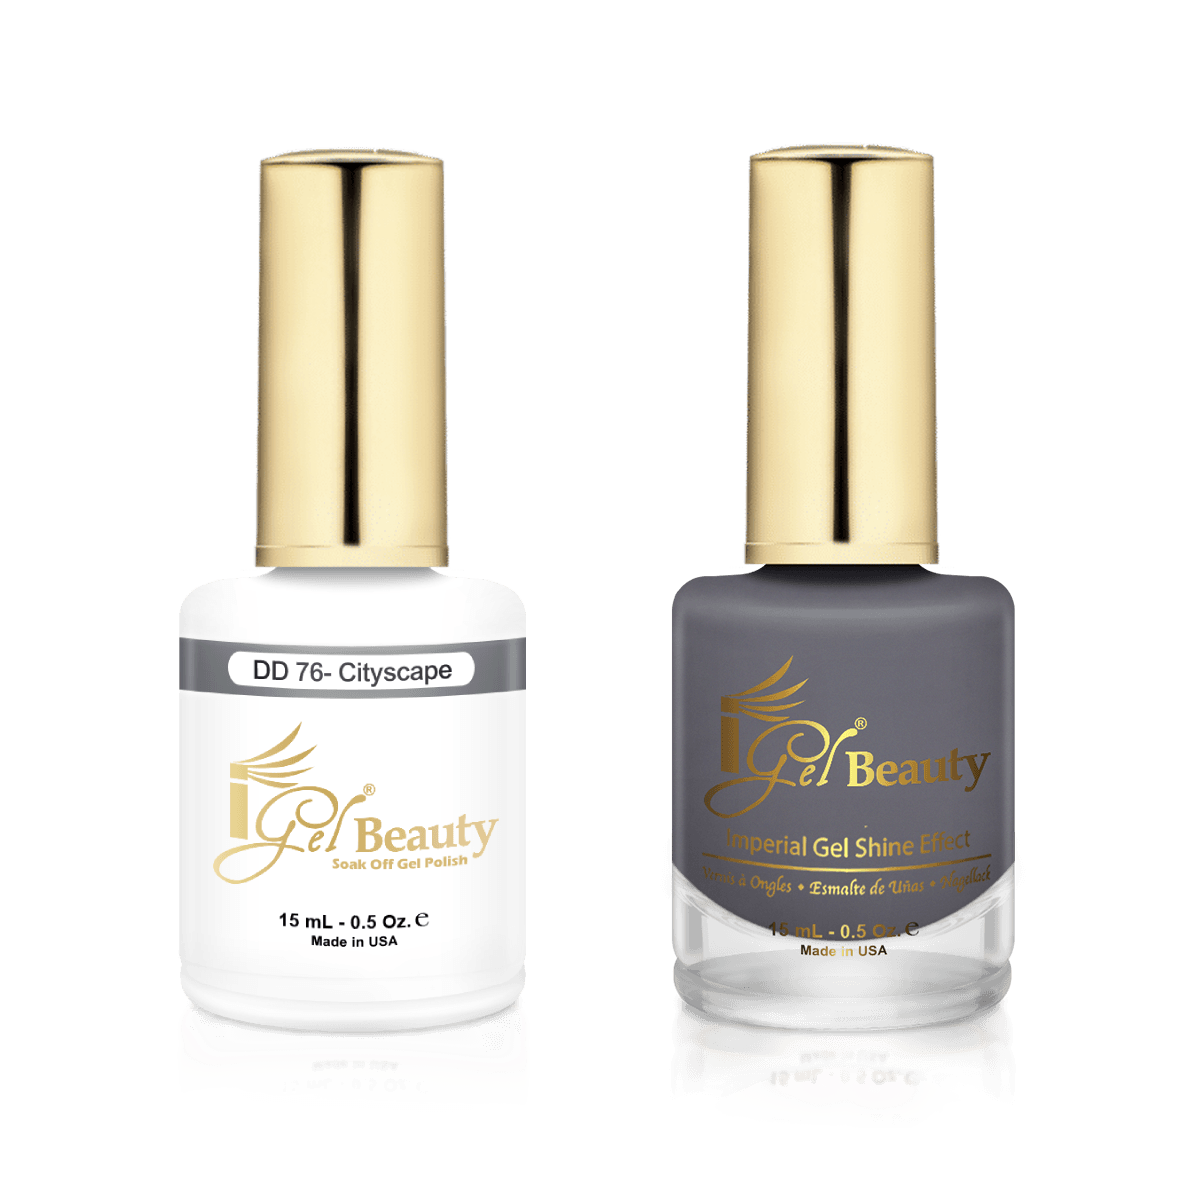 IGel Duo Gel Polish + Matching Nail Lacquer DD 76 CITYSCAPE